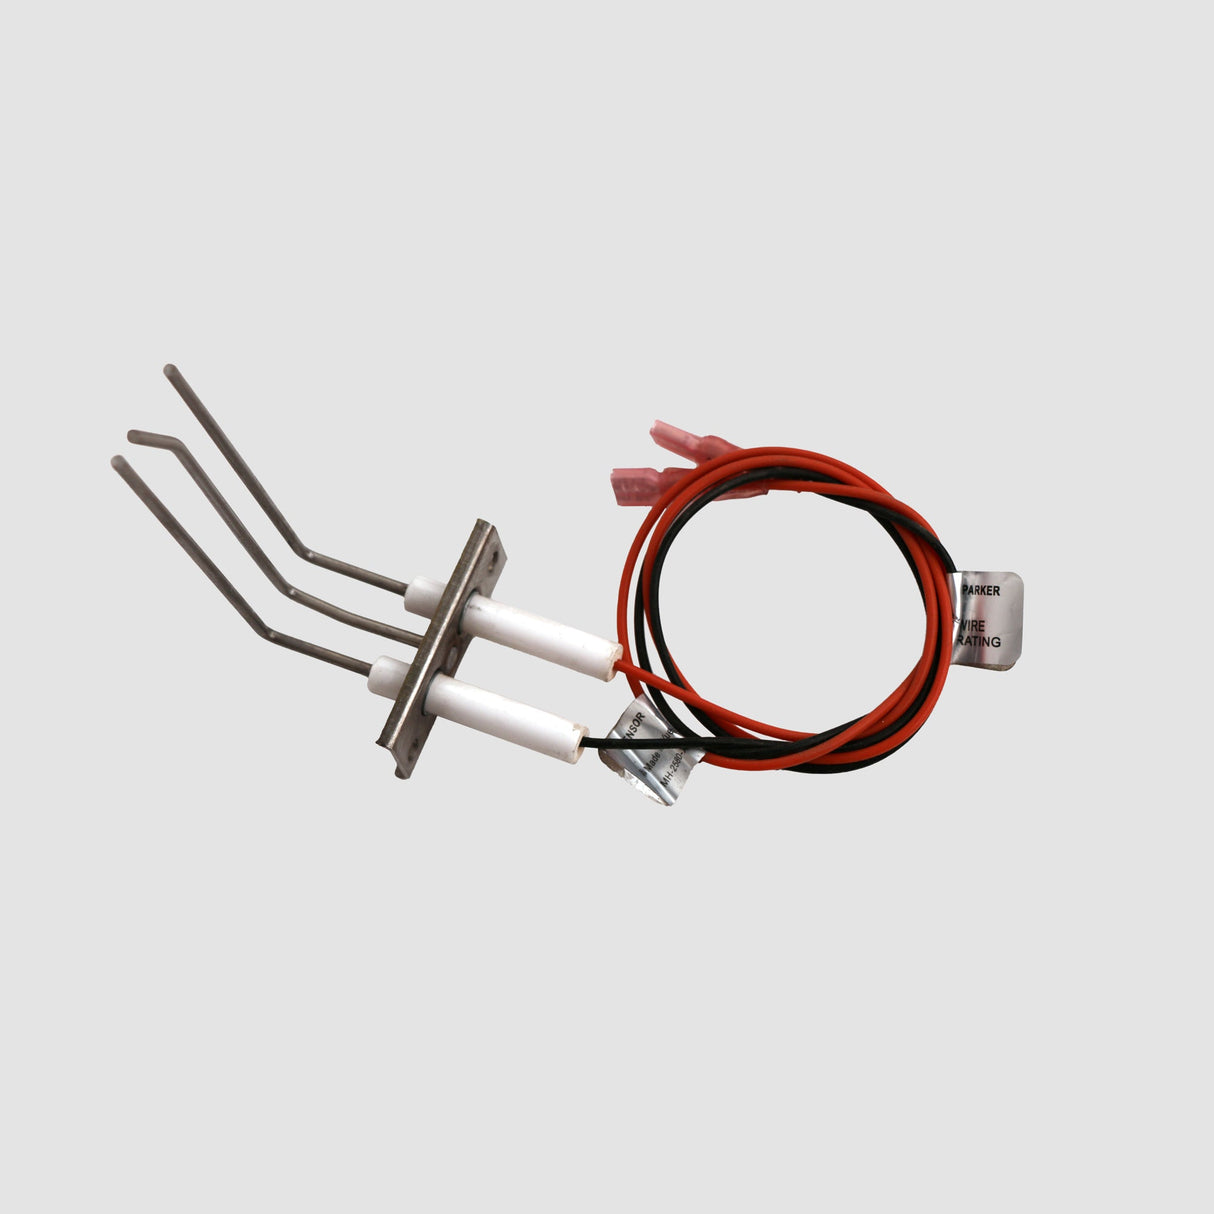 The Crystal Fire Electrode for Direct Spark Ignition Burners on a grey background